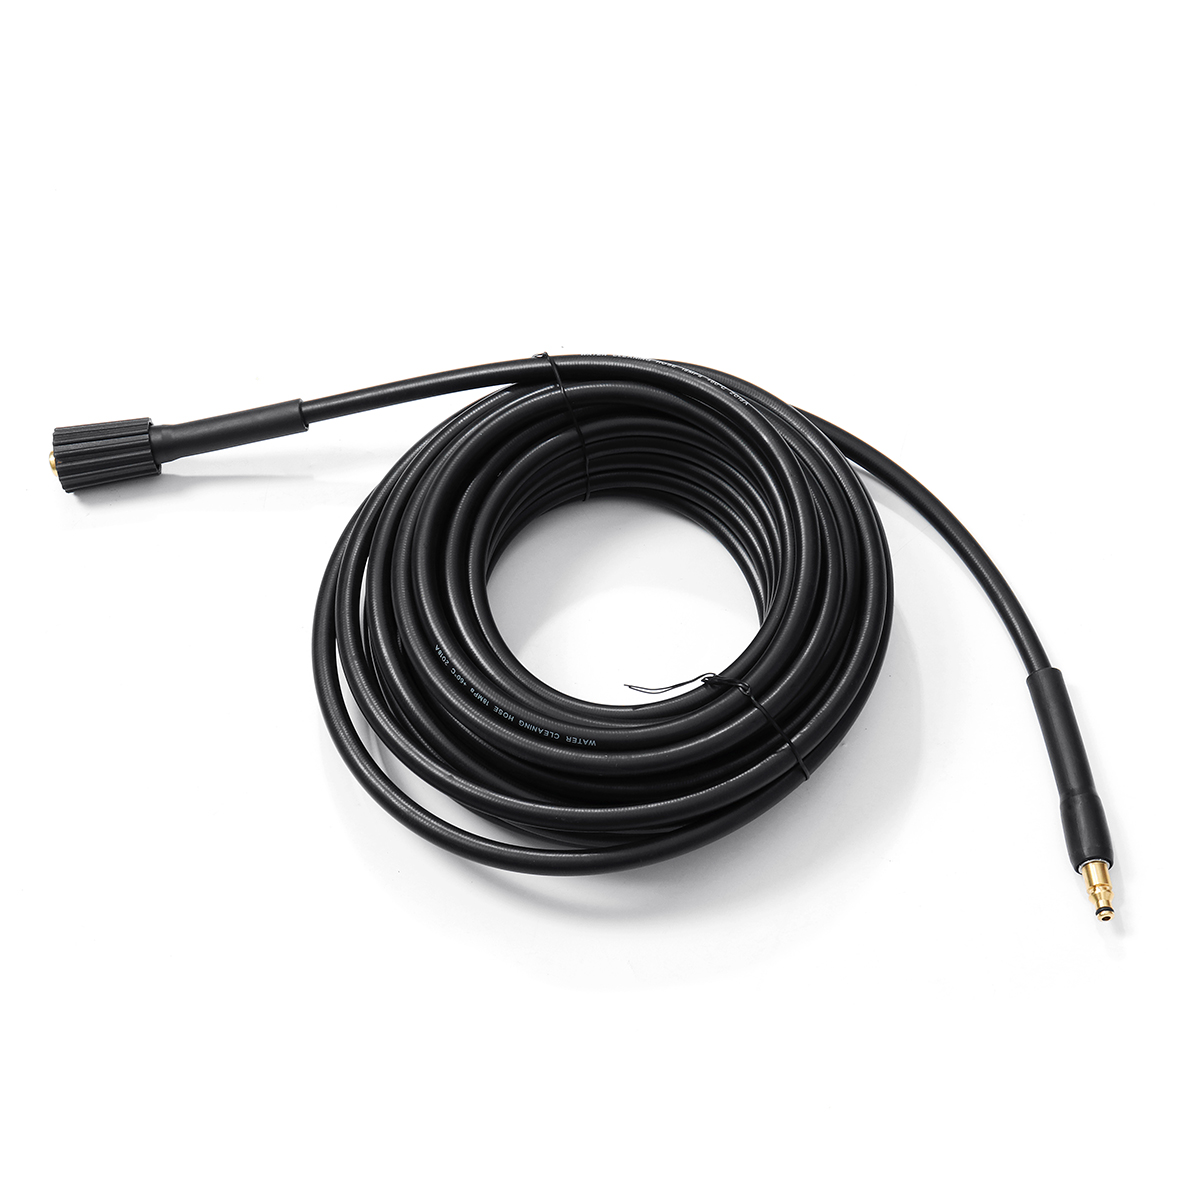 

15M High Pressure Washer Replacement Hose M22 18Mpa for Nilfisk C100 C110 C120 C130 C140